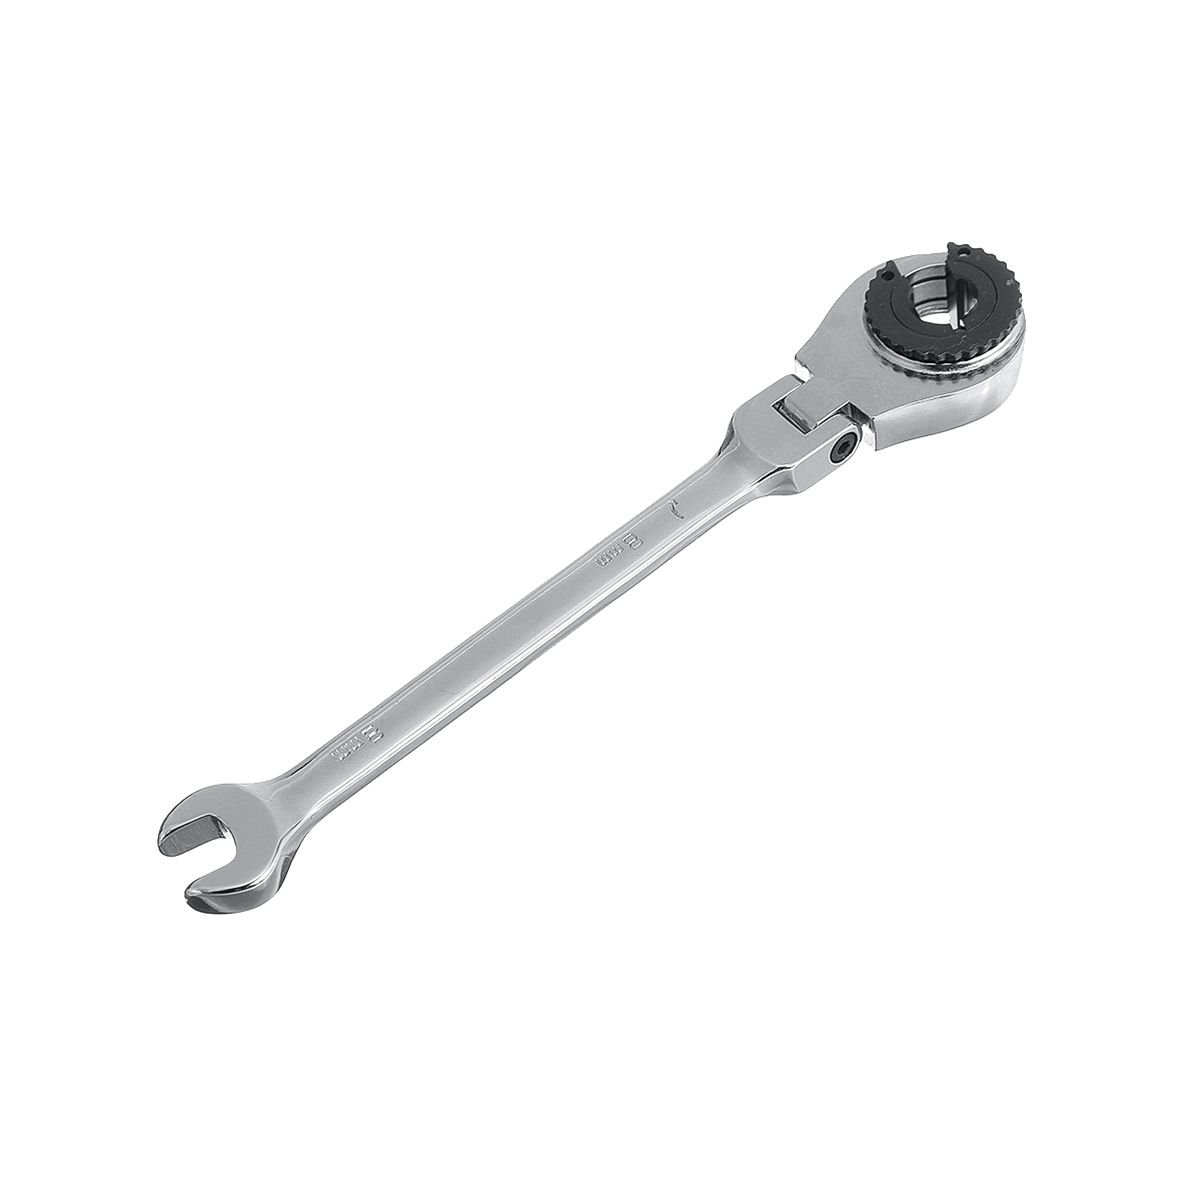 8-14mm-72-Tooth-Tubing-Ratchet-Wrench-Flexible-Head-Open-Spanners-Hand-Car-Repair-Tools-1763372